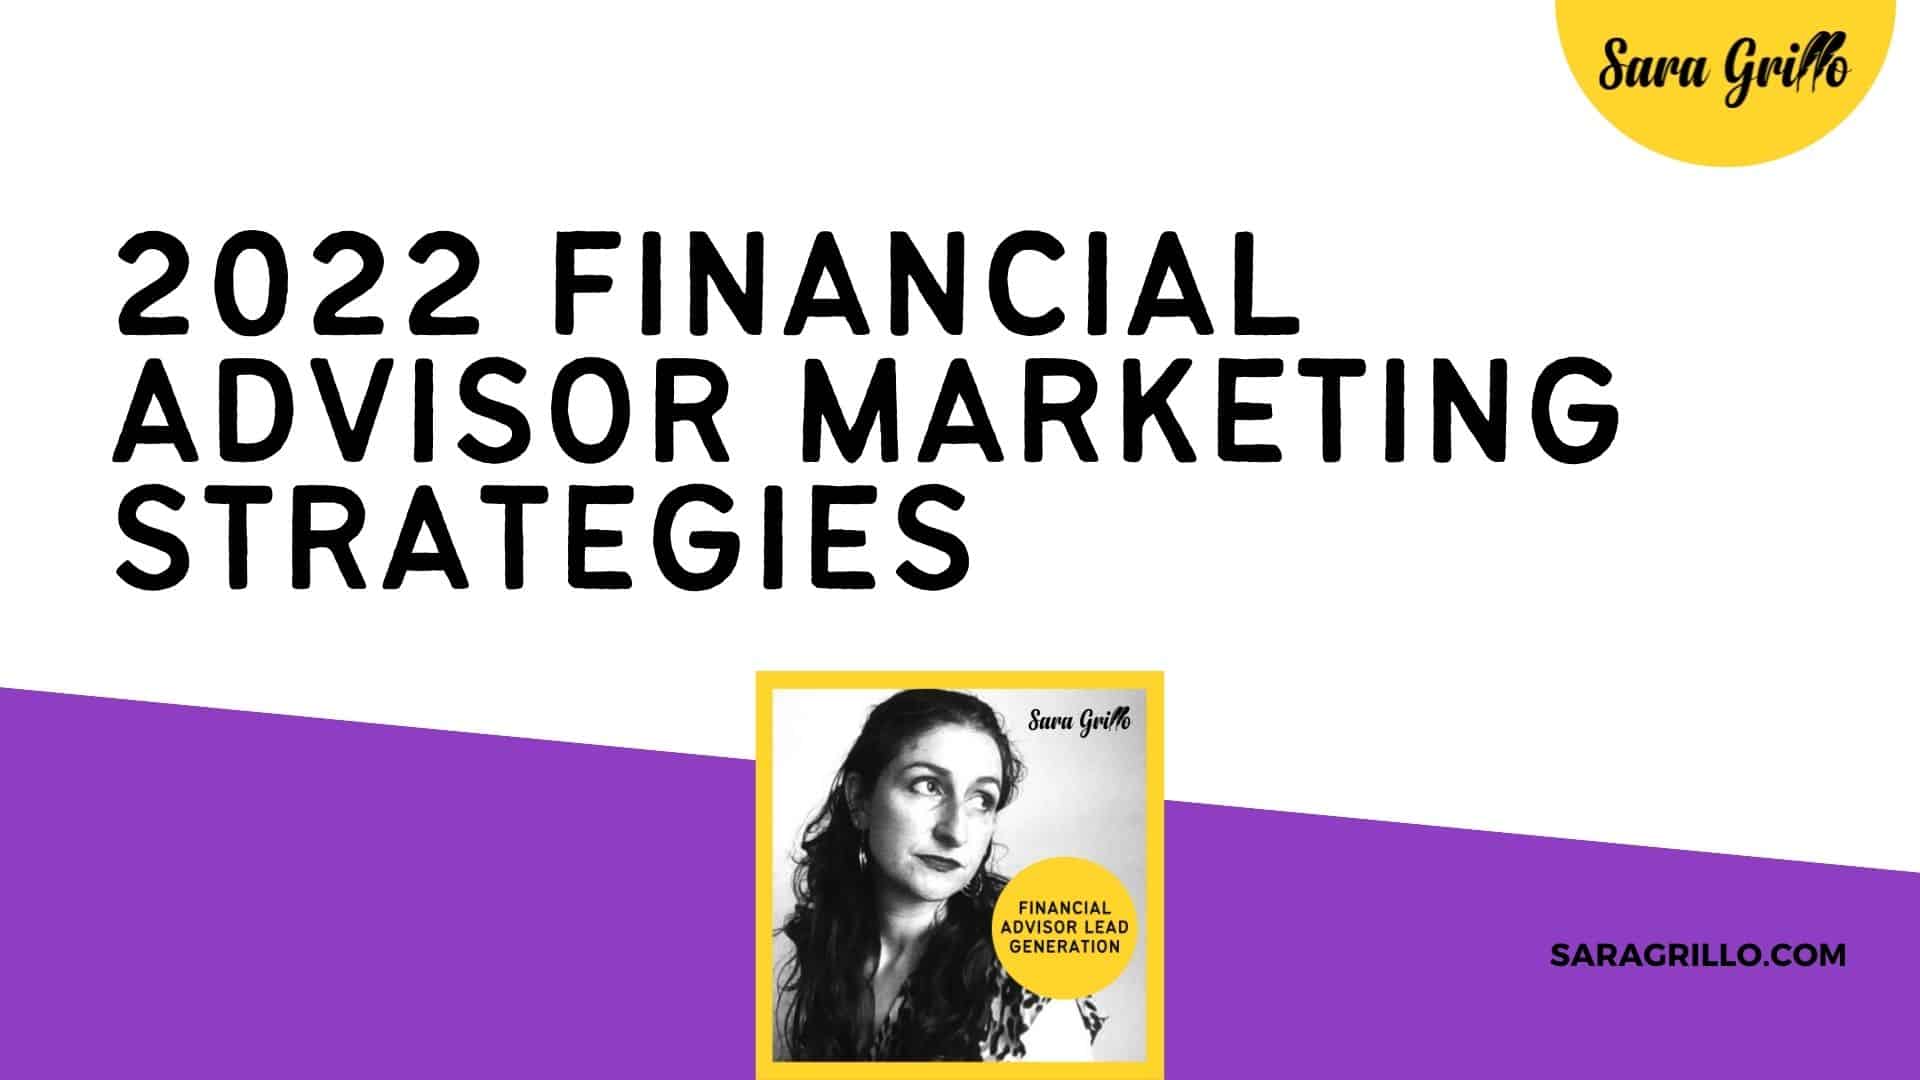 In this blog I give you five financial advisor marketing strategies for 2022!